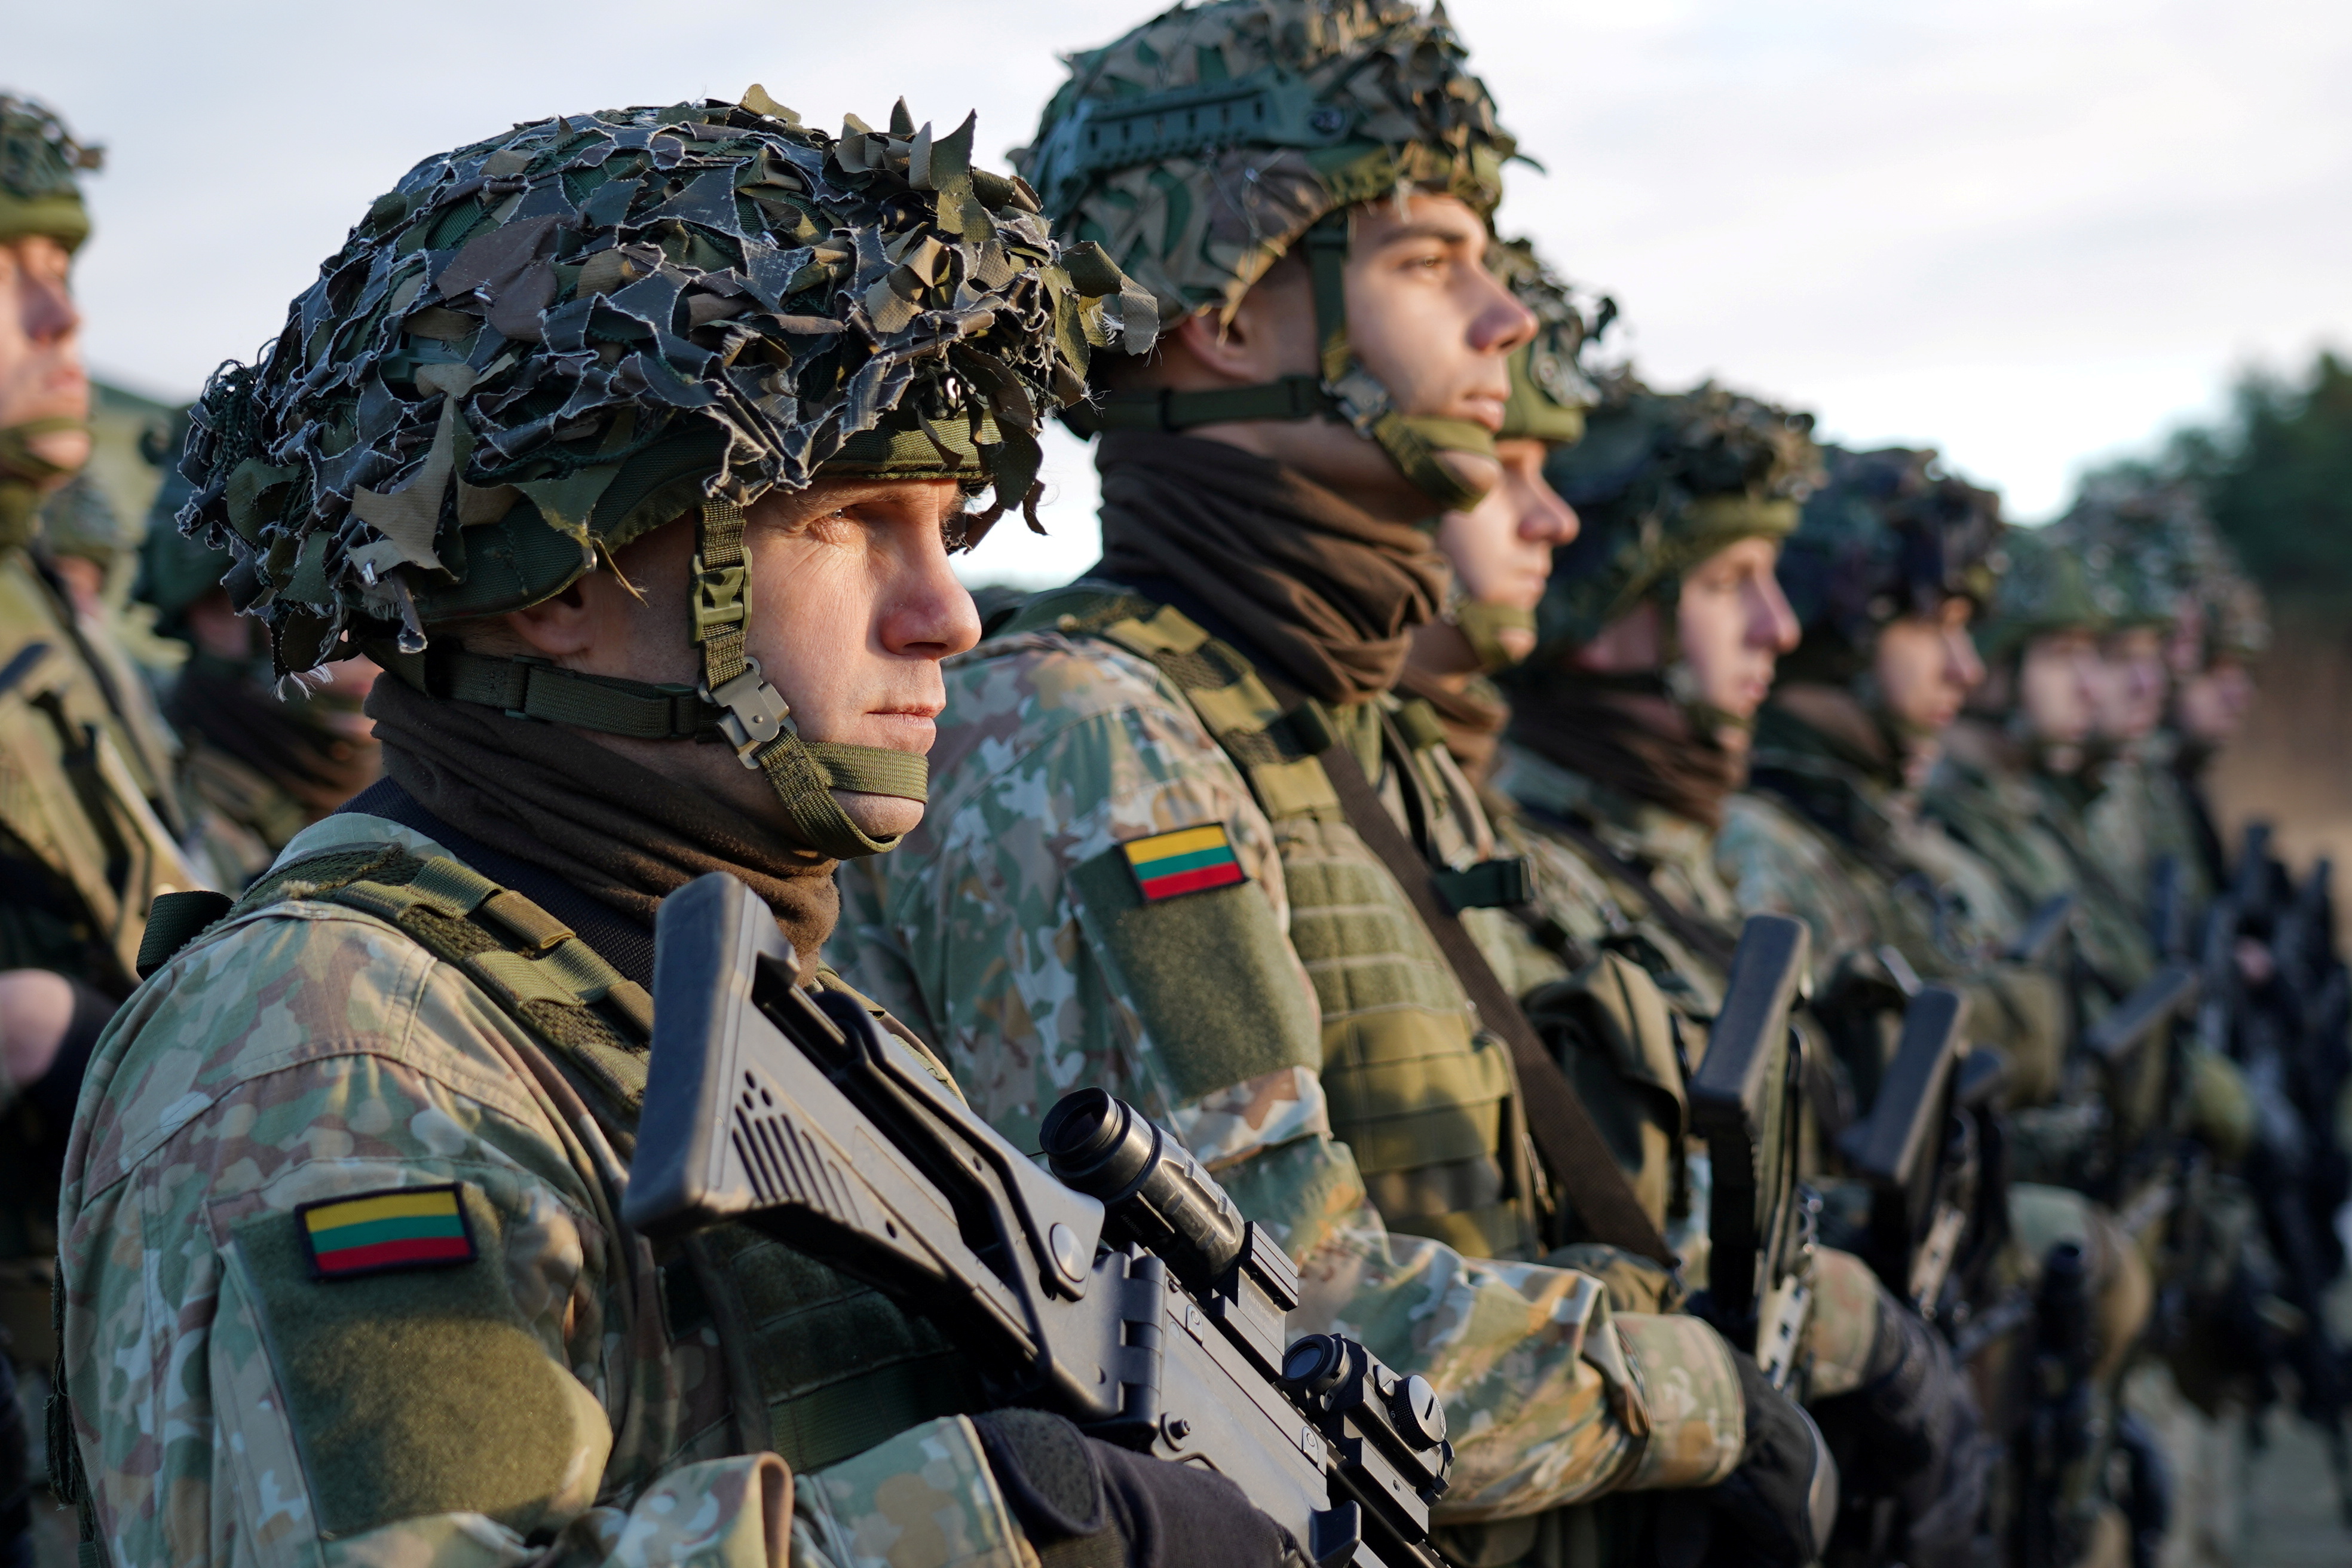 Lithuanian President Nauseda visits troops deployed at the Belarus border as the migrant crisis continues